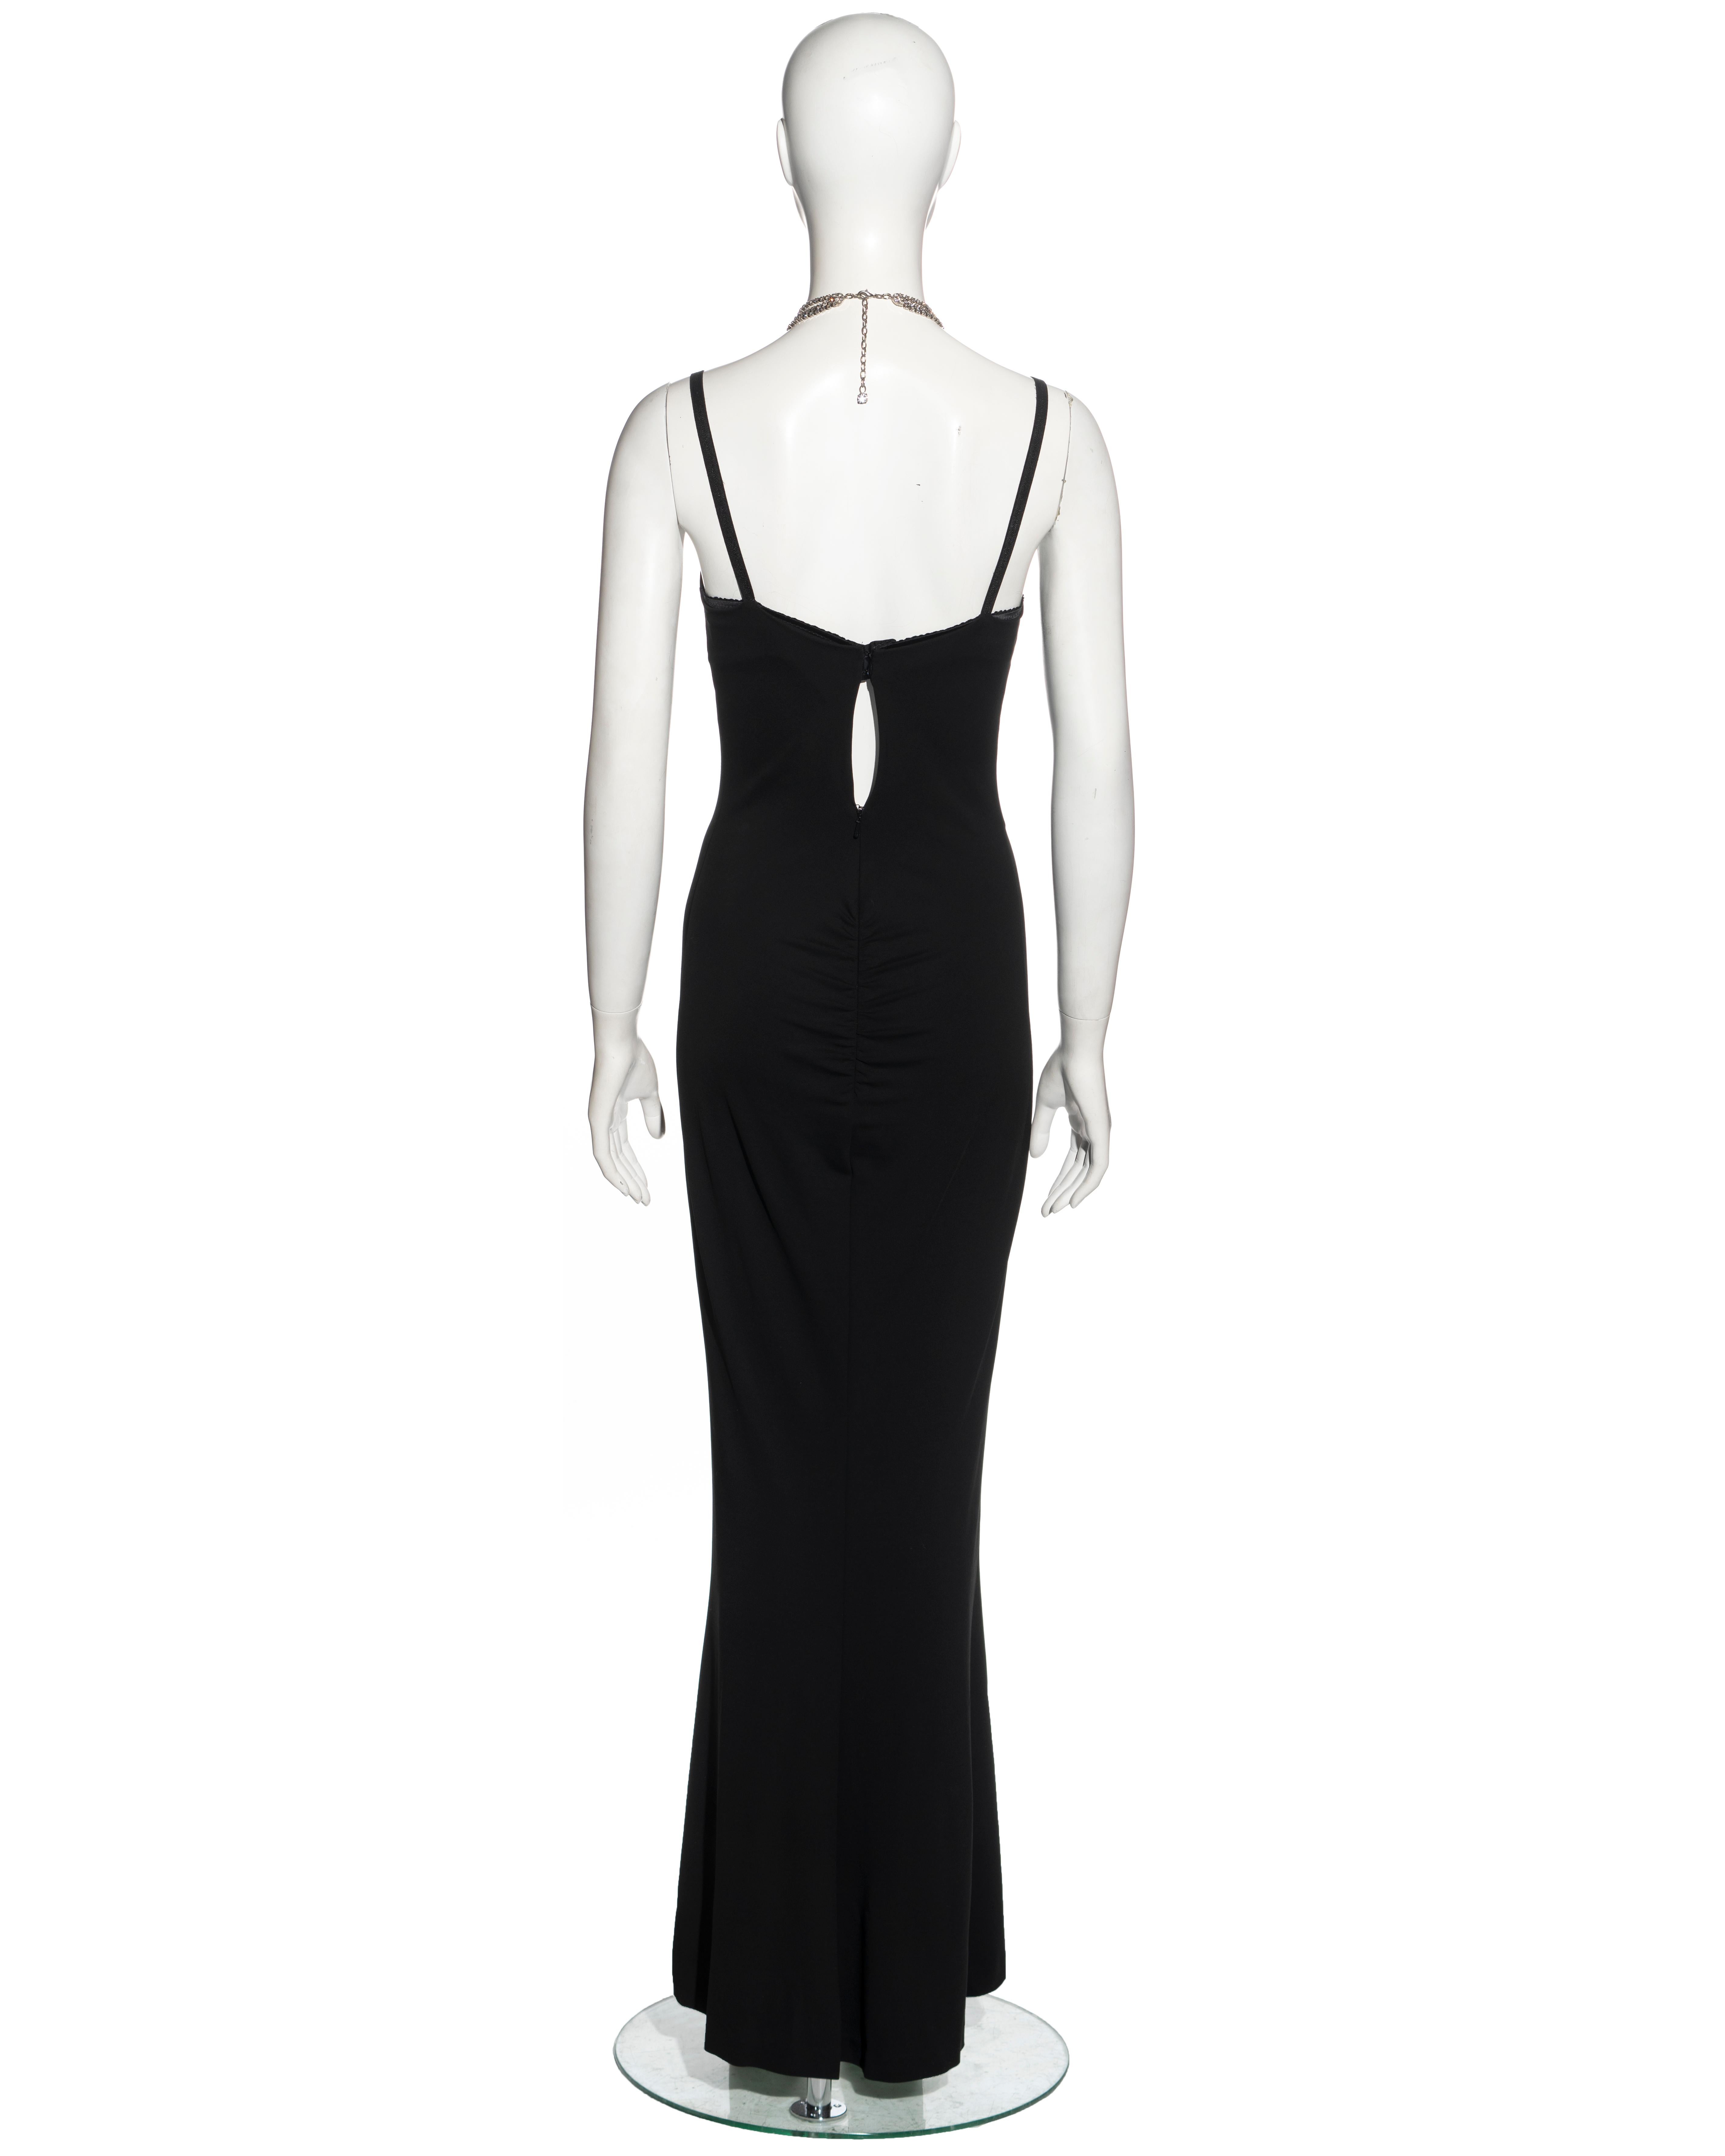 Dolce & Gabbana black maxi dress with crystal choker necklace, ss 2001 For Sale 1